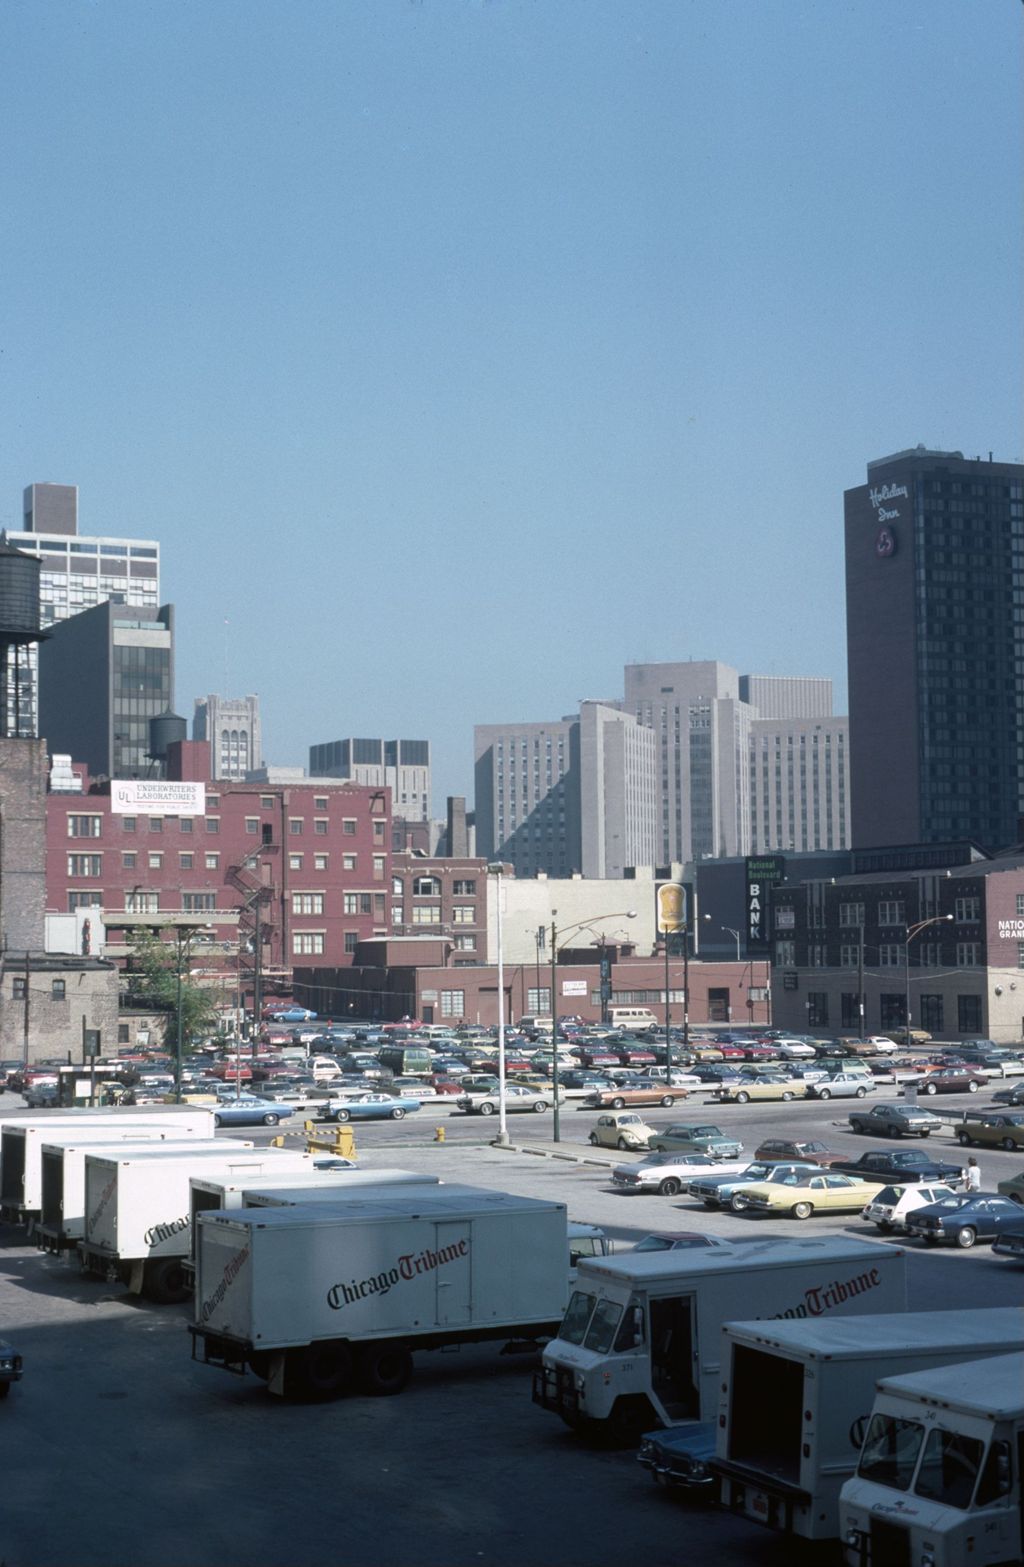 Parking lots and Near North Side buildings